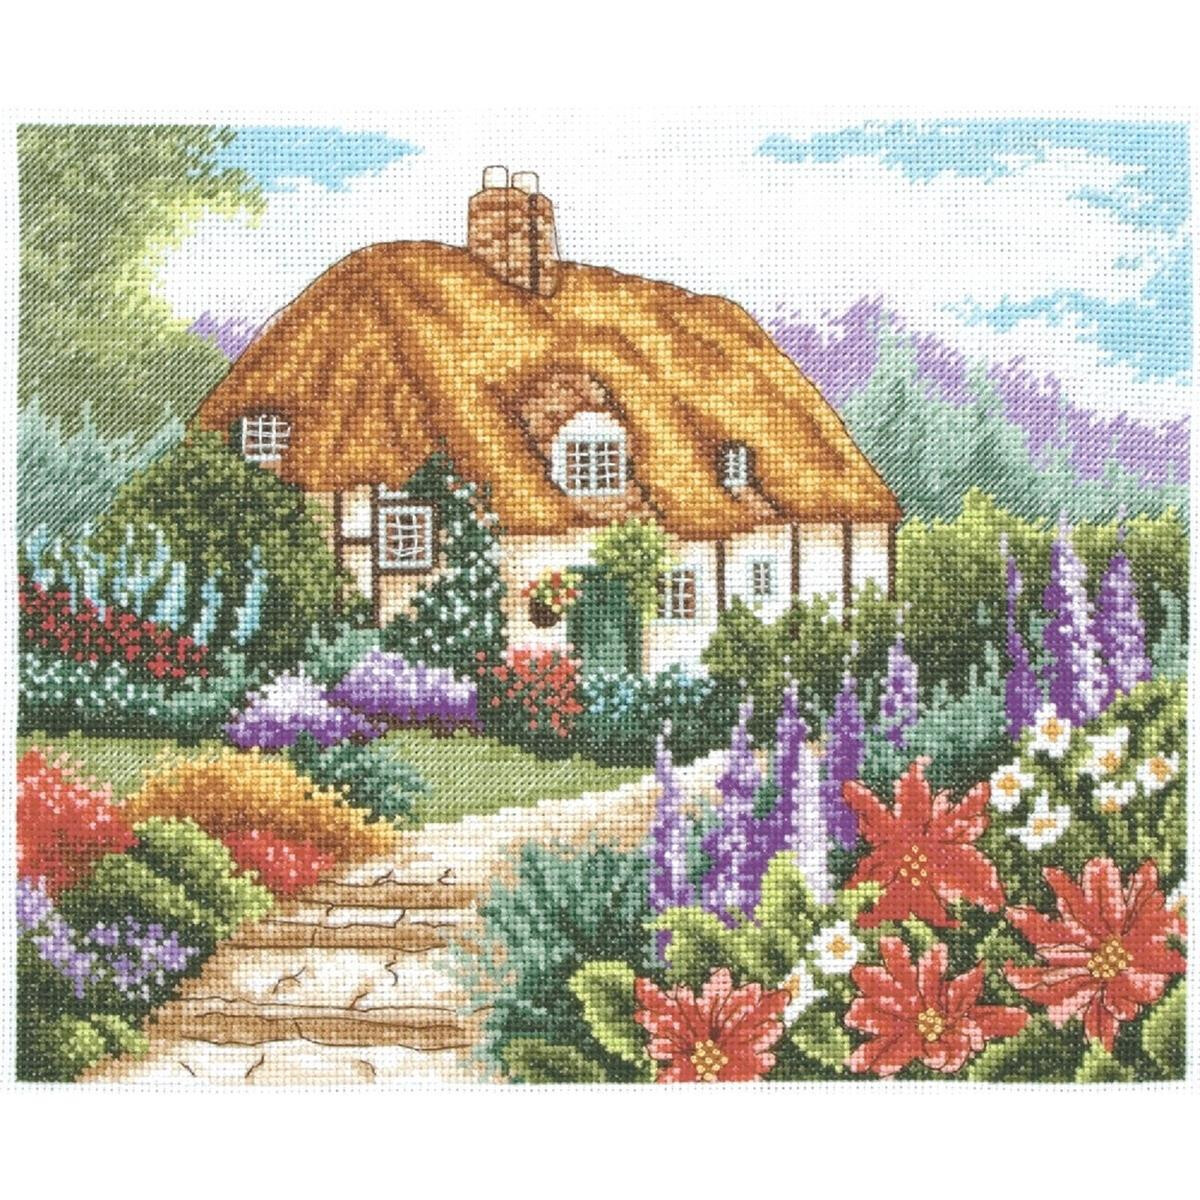 Anchor counted Cross Stitch kit "Cottage Garden In...